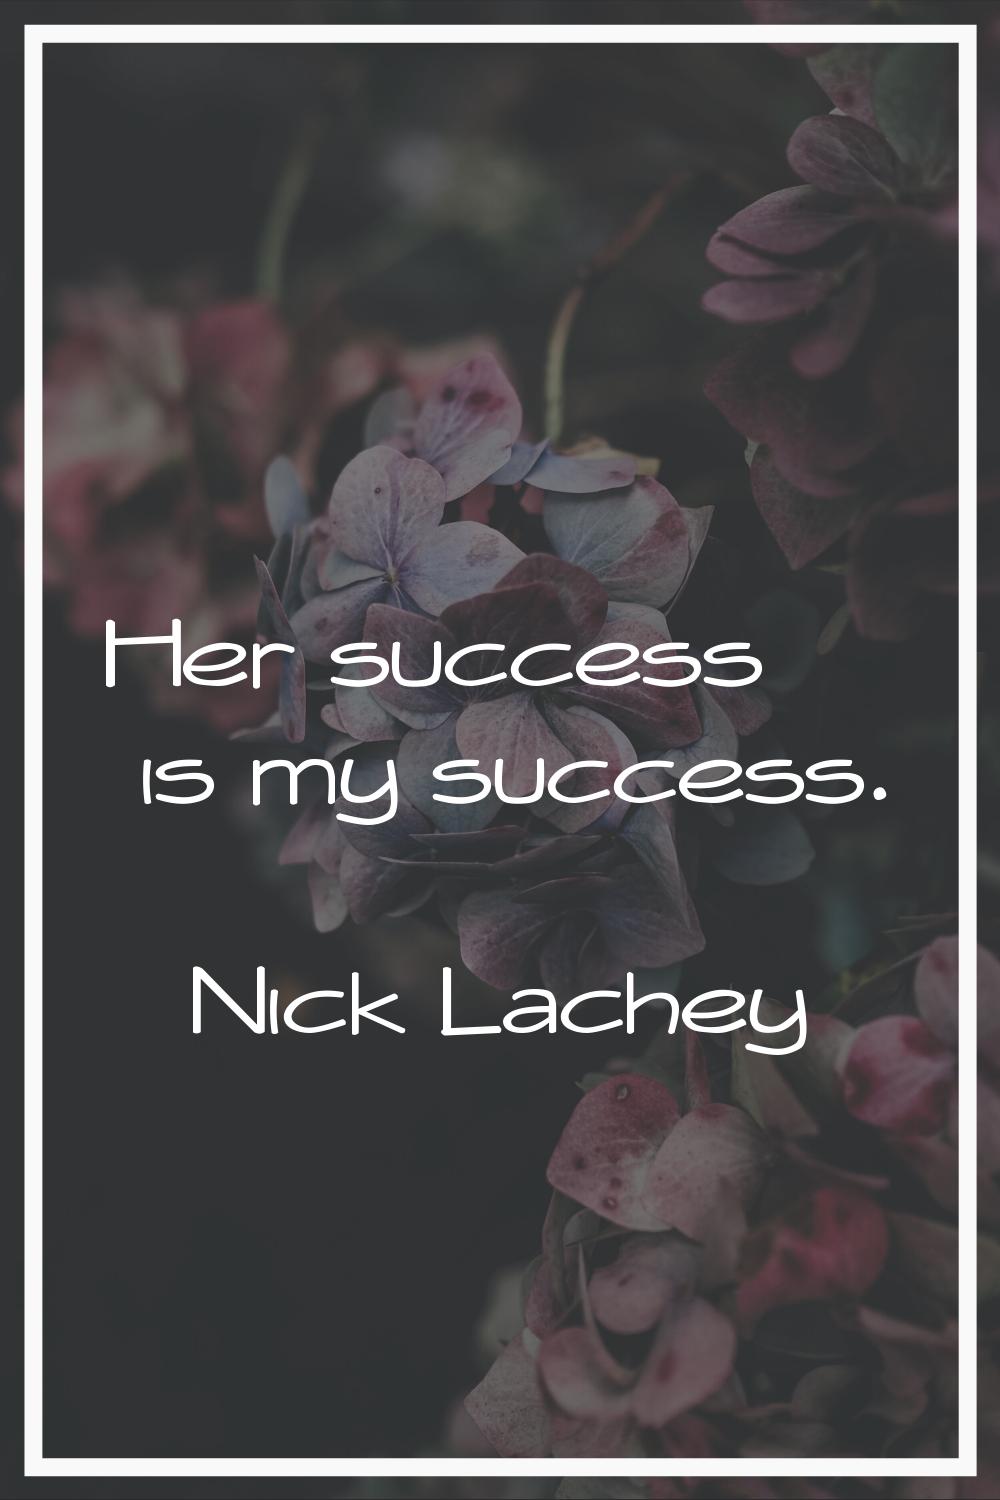 Her success is my success.